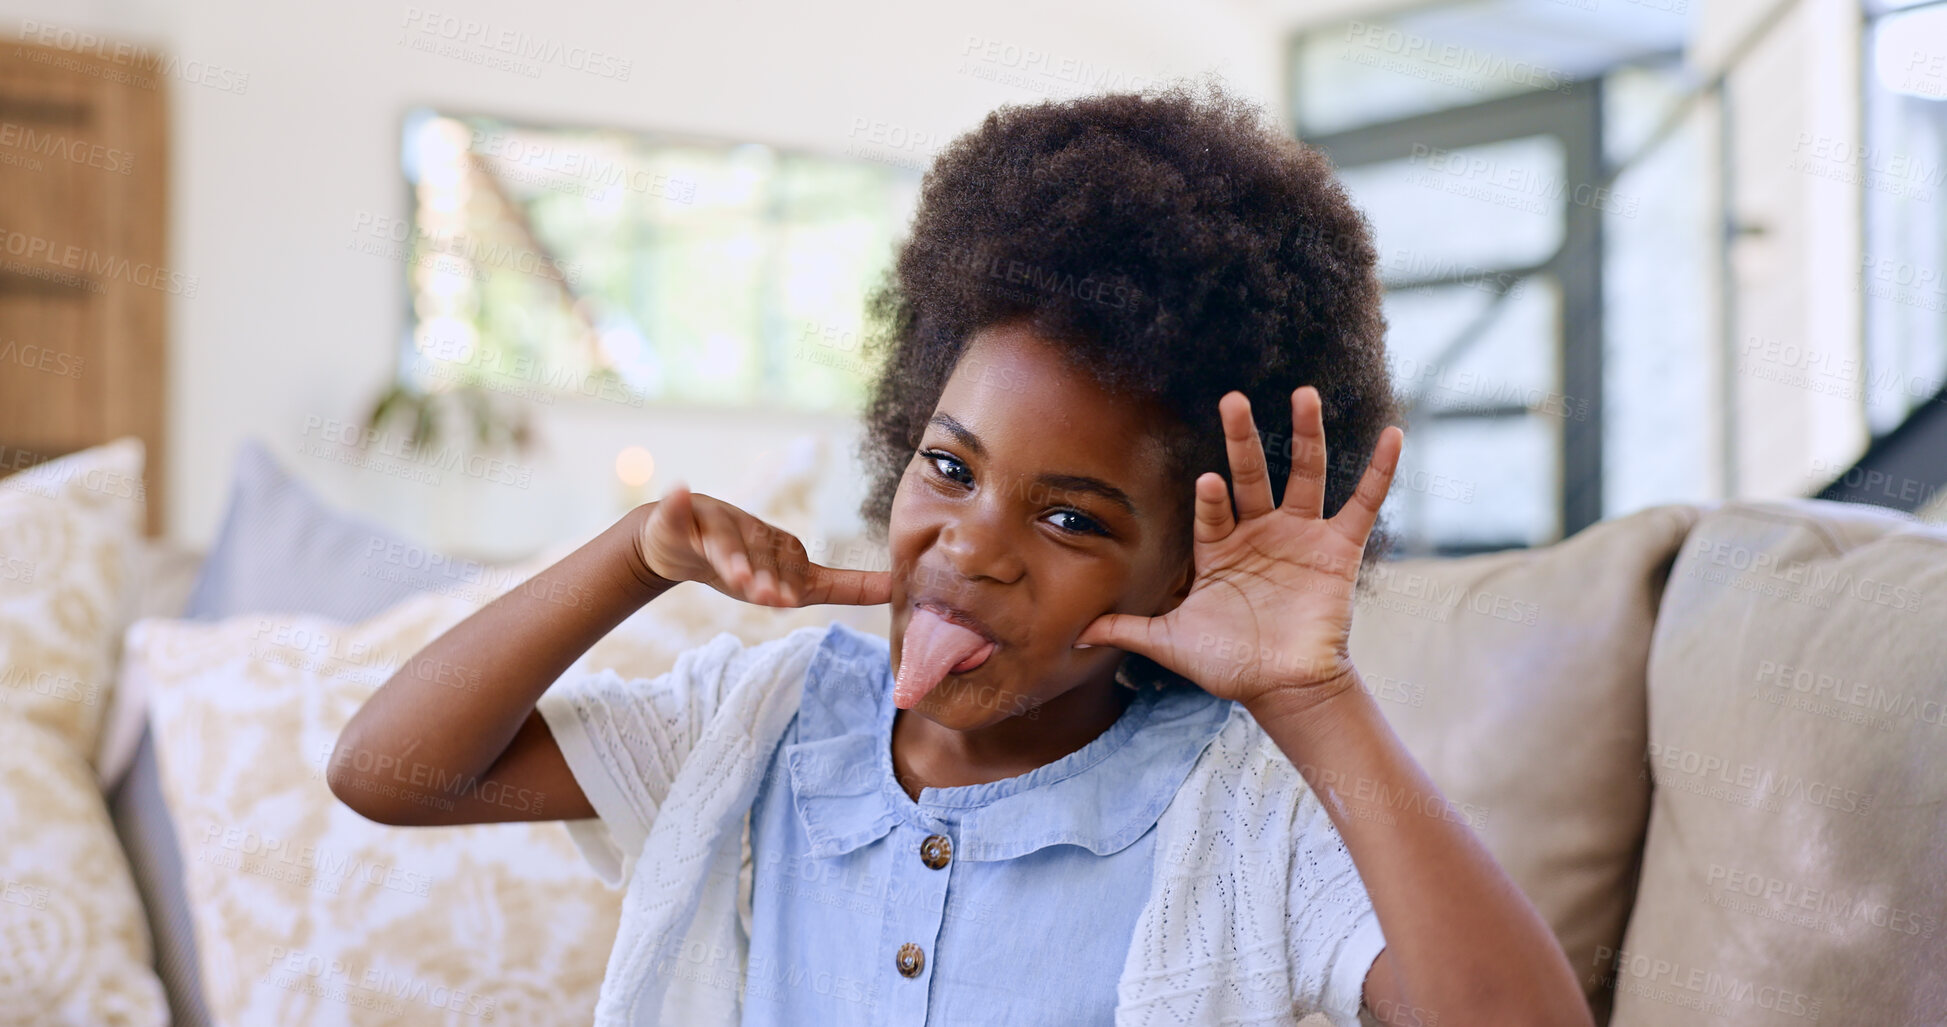 Buy stock photo Funny, face and girl child with tongue out on a sofa for fun, playing or goofy personality at home. Crazy, hand gesture and portrait of African kid in living room with comic expression or silly mood